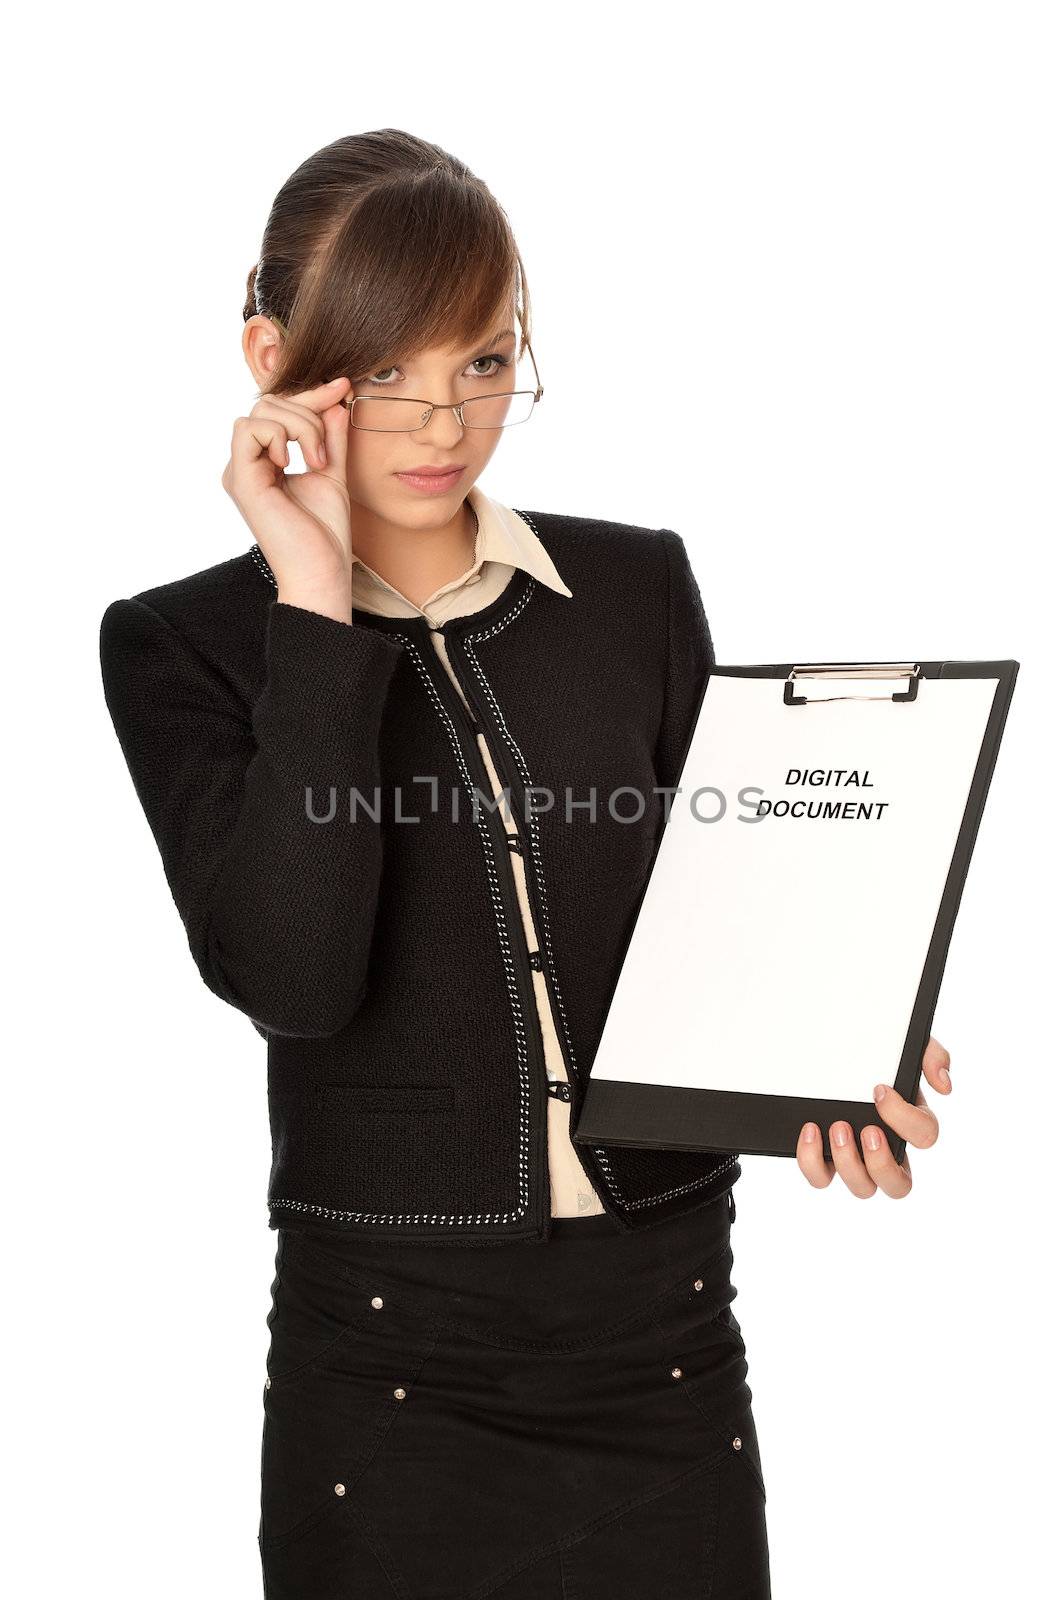 Woman holding digital document in the hand